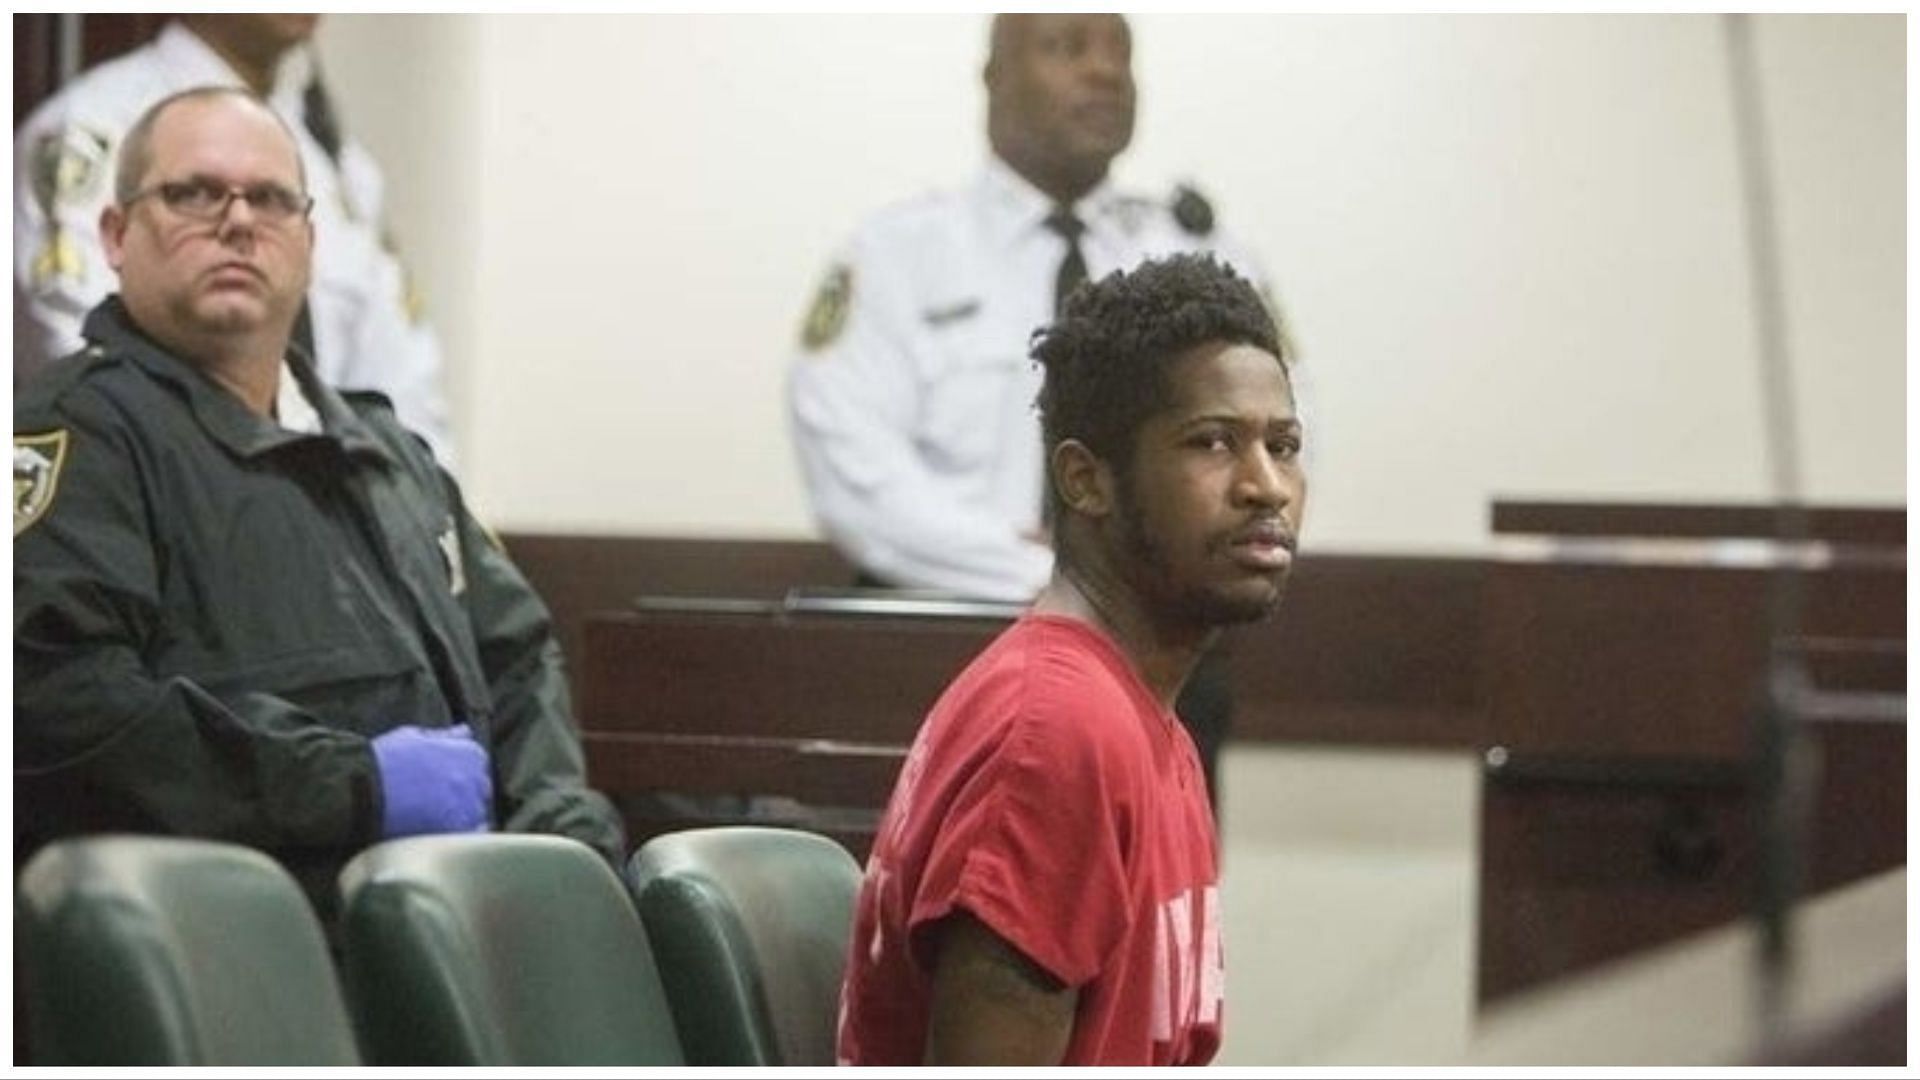 Howell Donaldson pleaded guilty to killing four people in 2017, (Image via Century 21 Affiliated - New Tampa/Twitter)